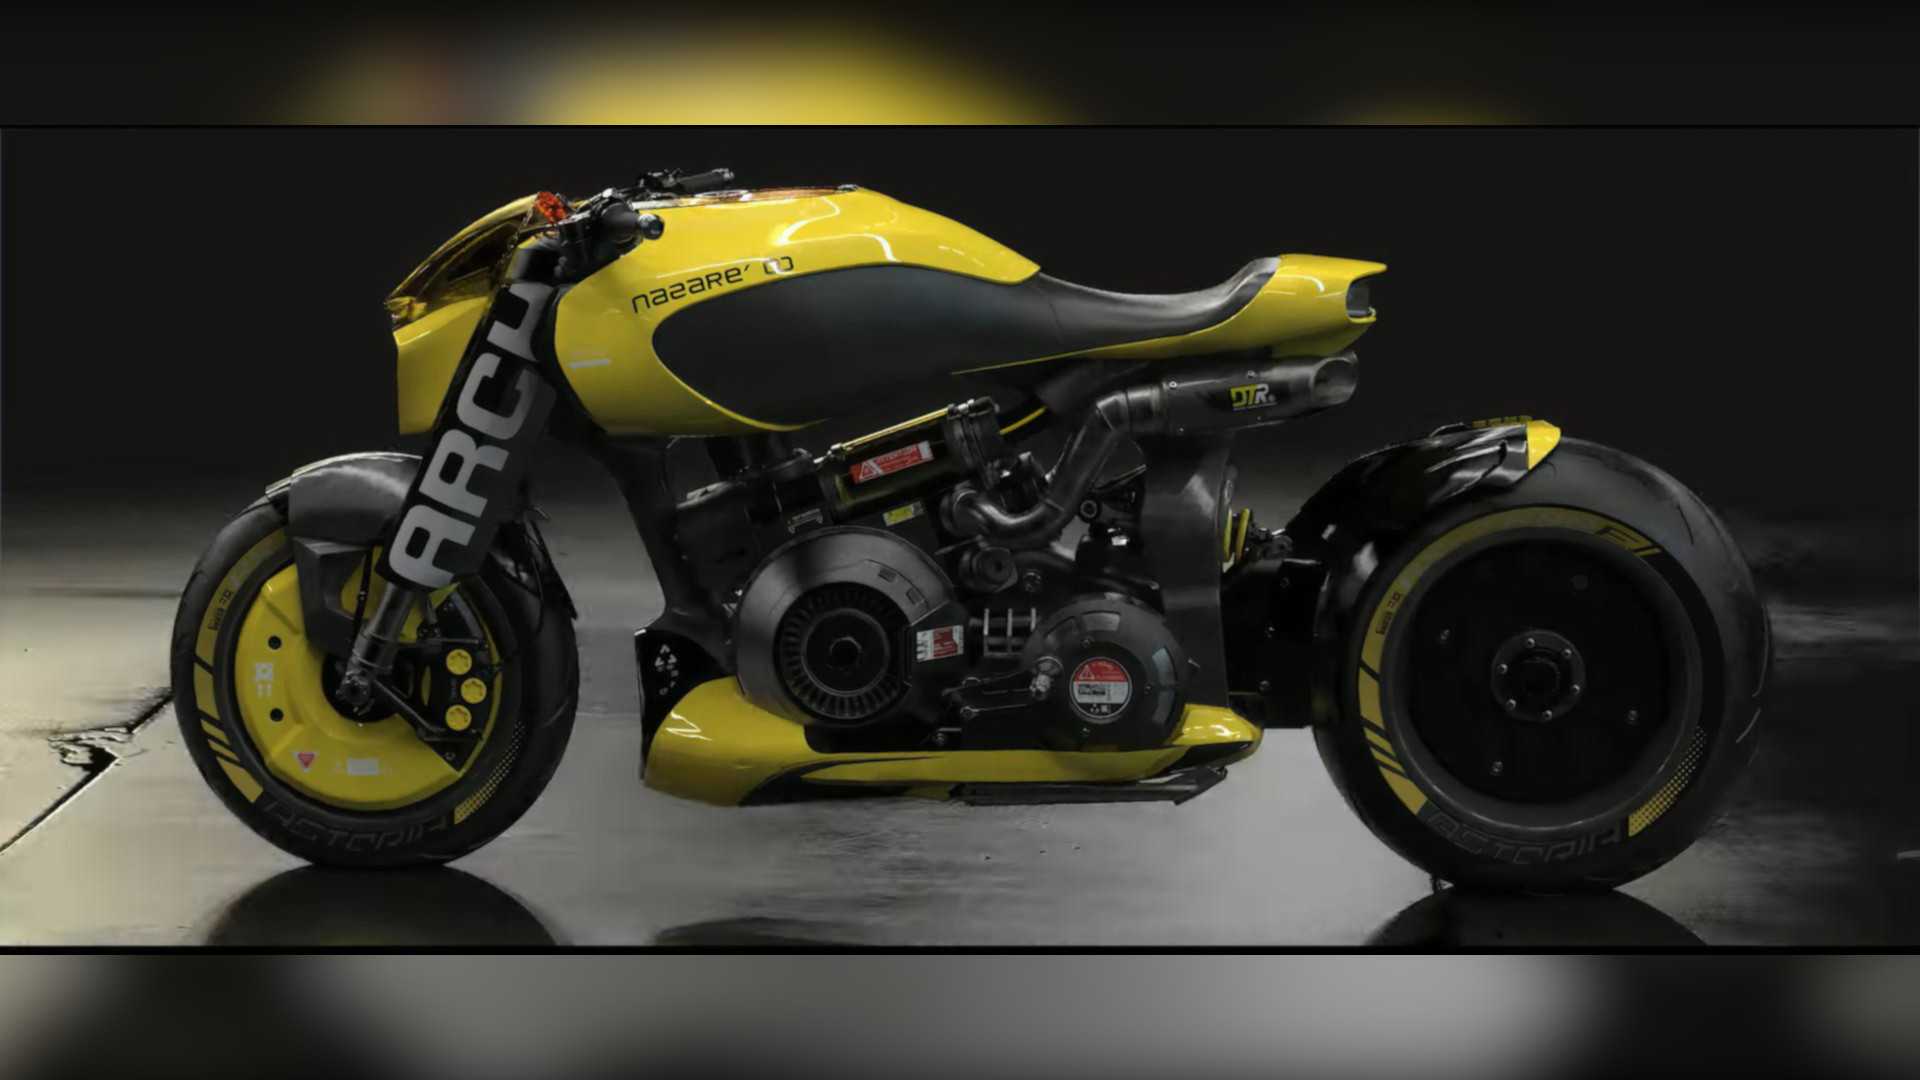 Cyberpunk 2077 Launches Arch Motorcycle Into The Future